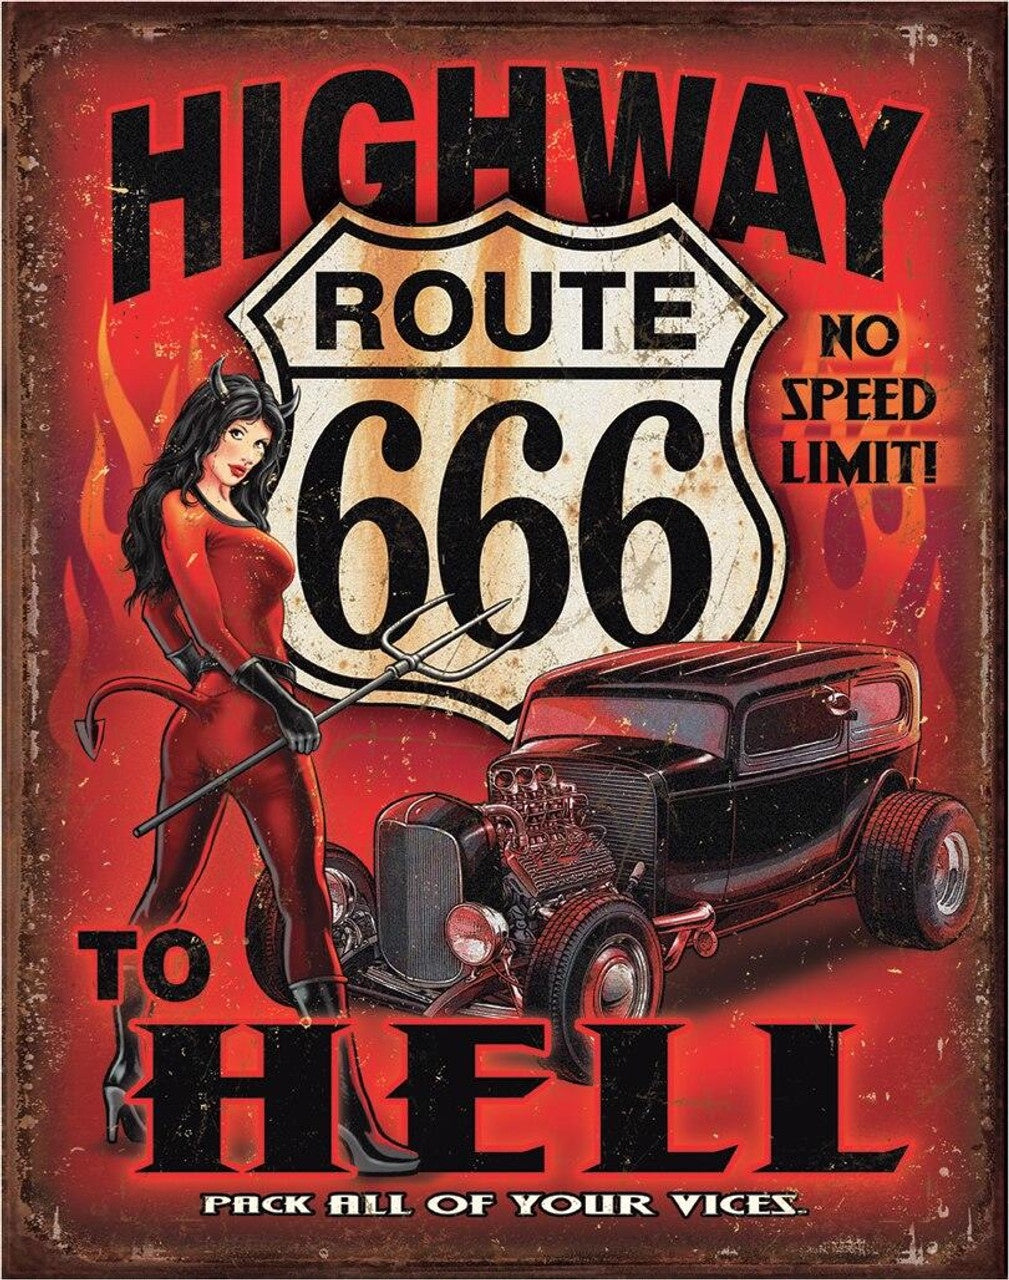 Route 666 - Highway to Hell Tin Sign